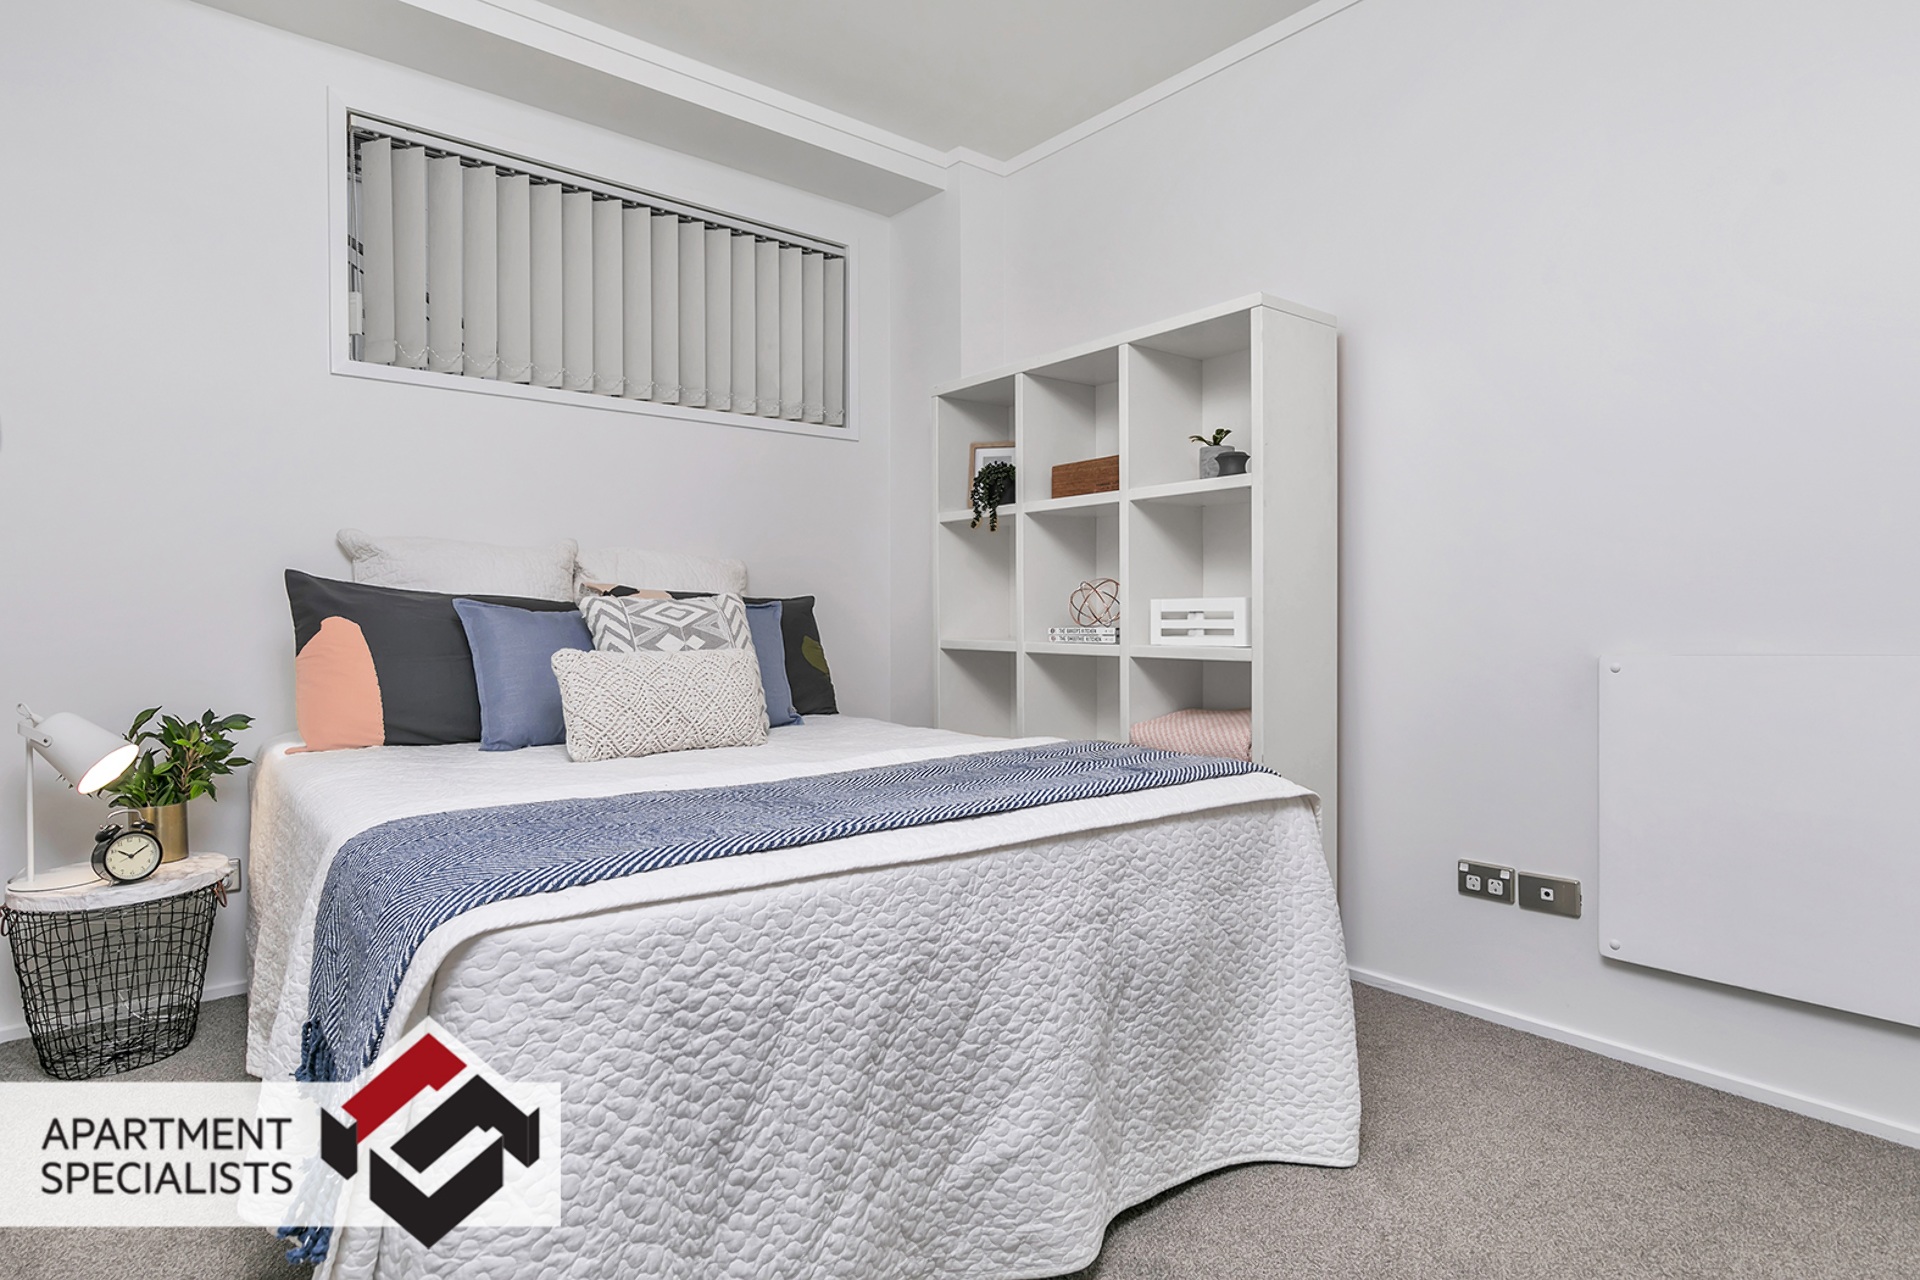 6 | 53 Cook Street, City Centre | Apartment Specialists